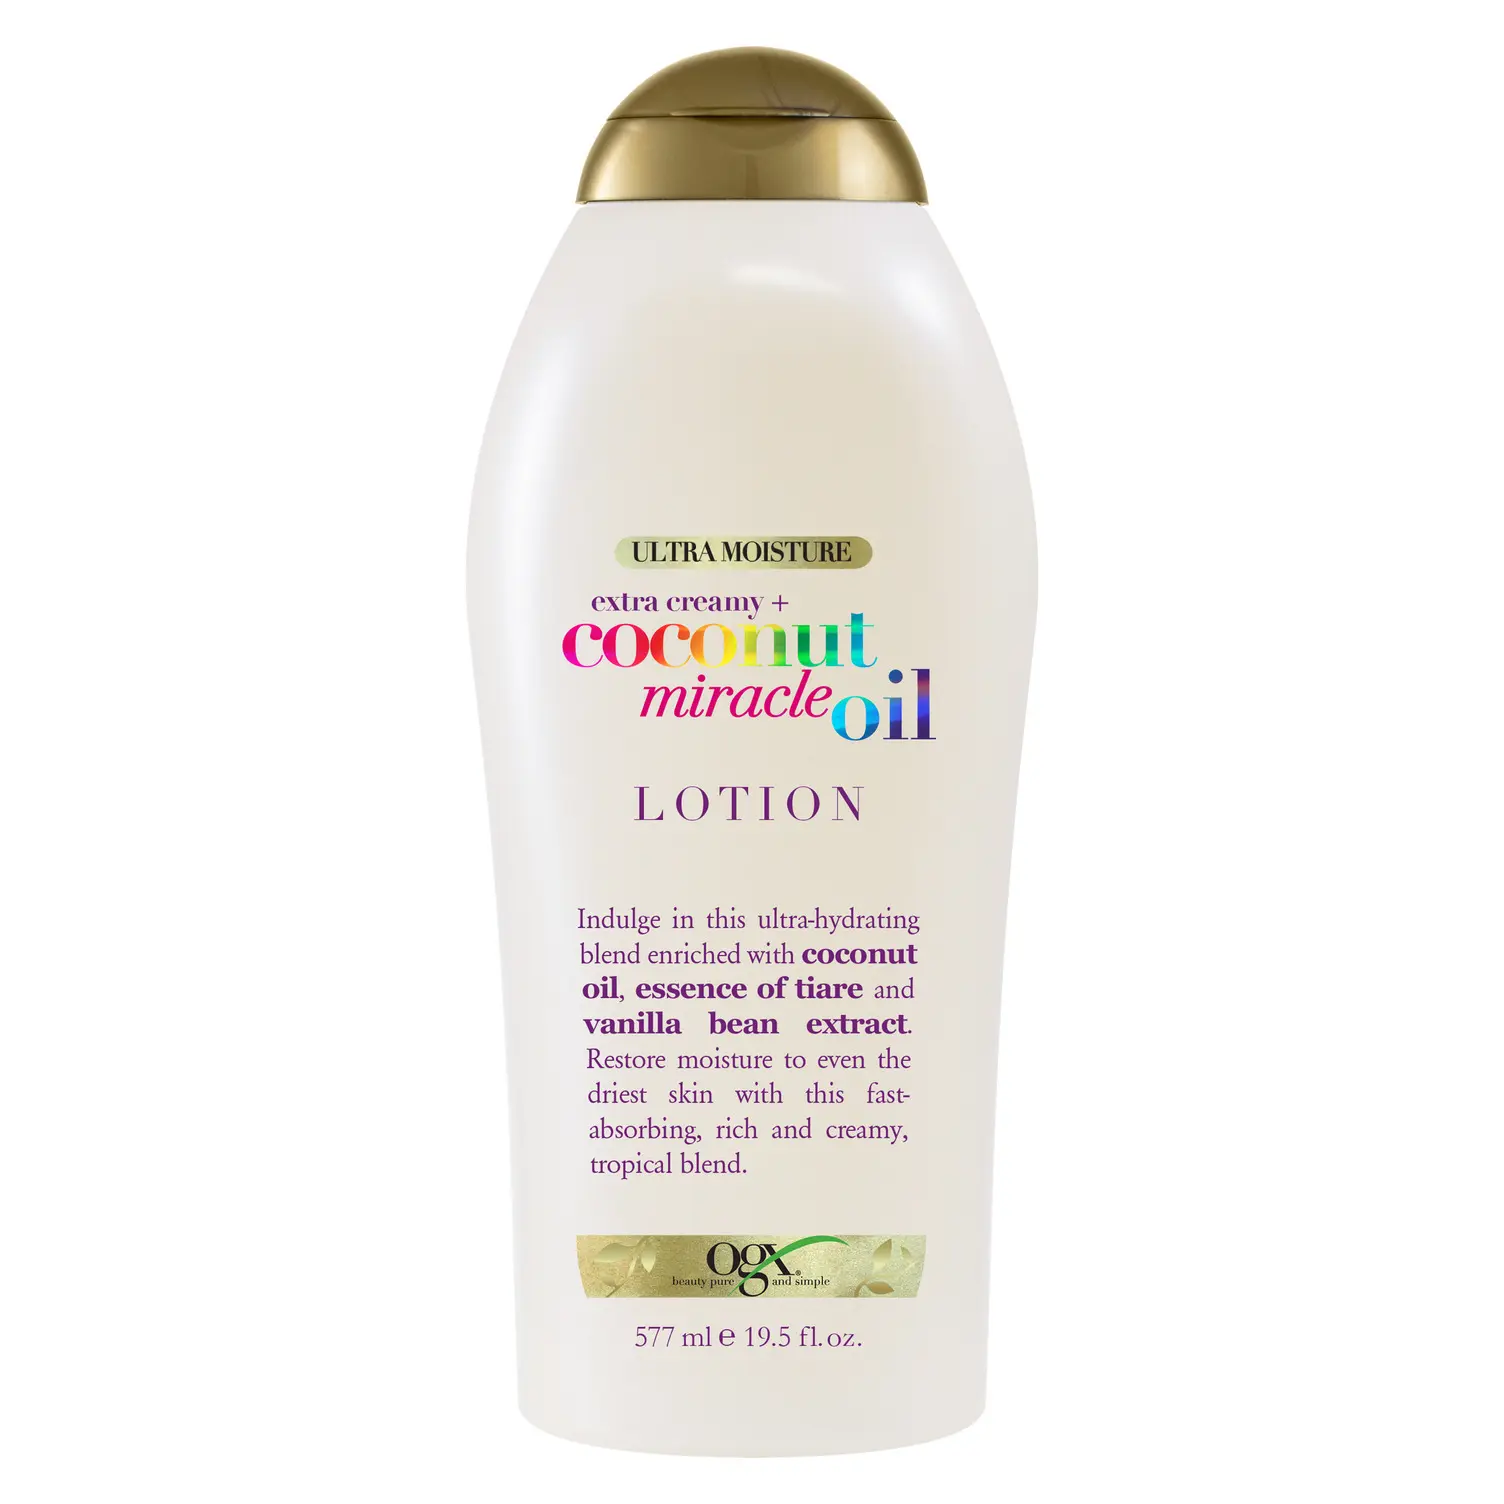 Extra Creamy + Coconut Miracle Oil Ultra Moisture Lotion 19.5 fl oz (1)